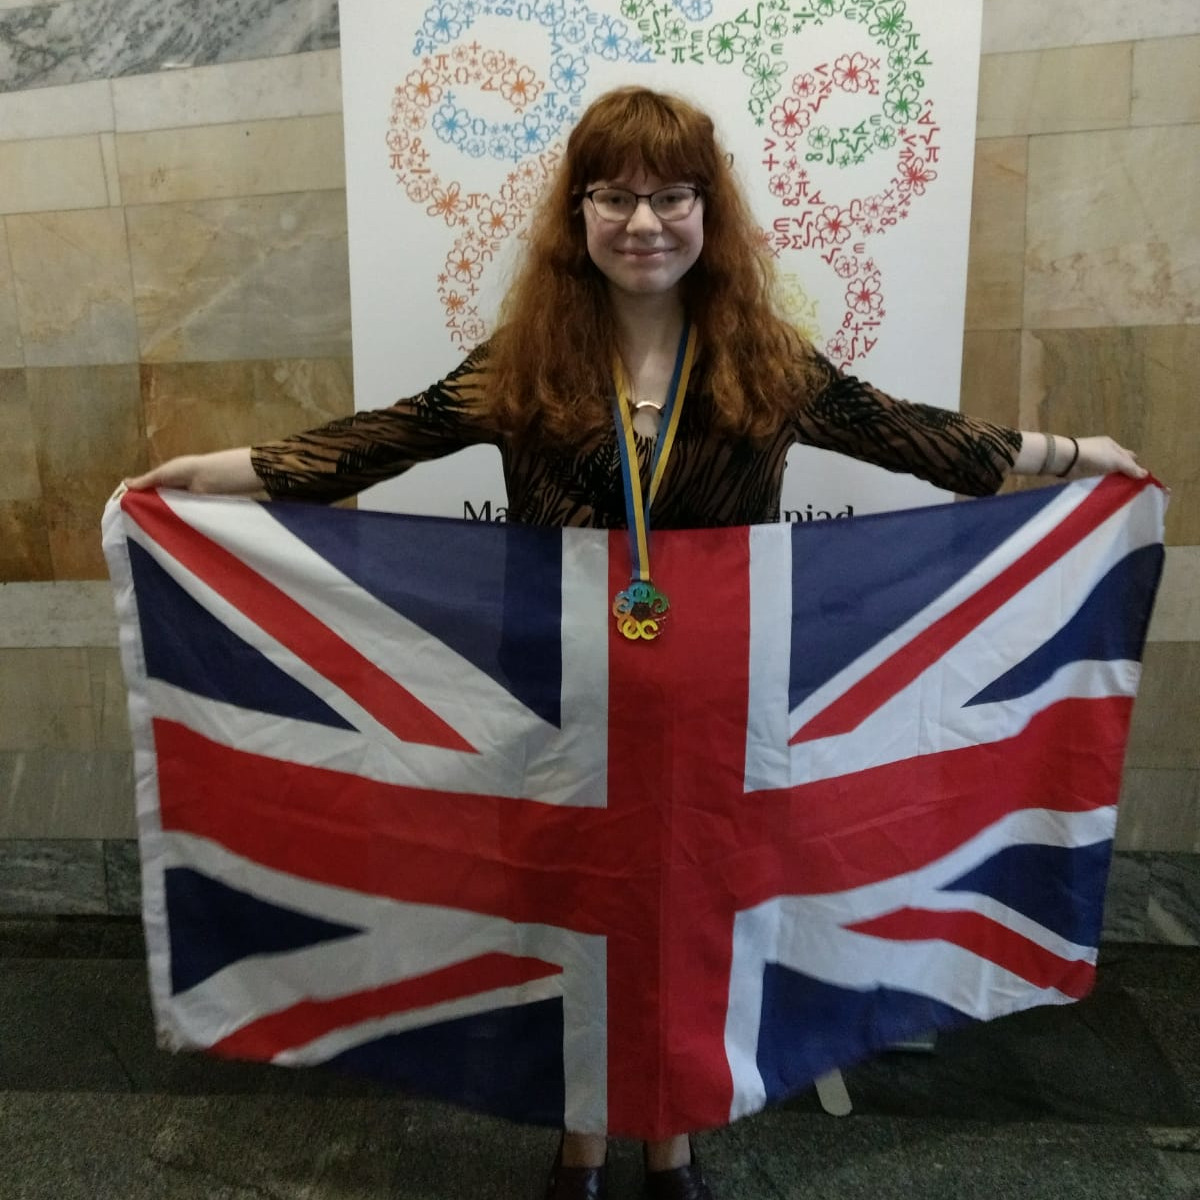 Naomi - silver medal at the European Girls Mathematical Olympiad